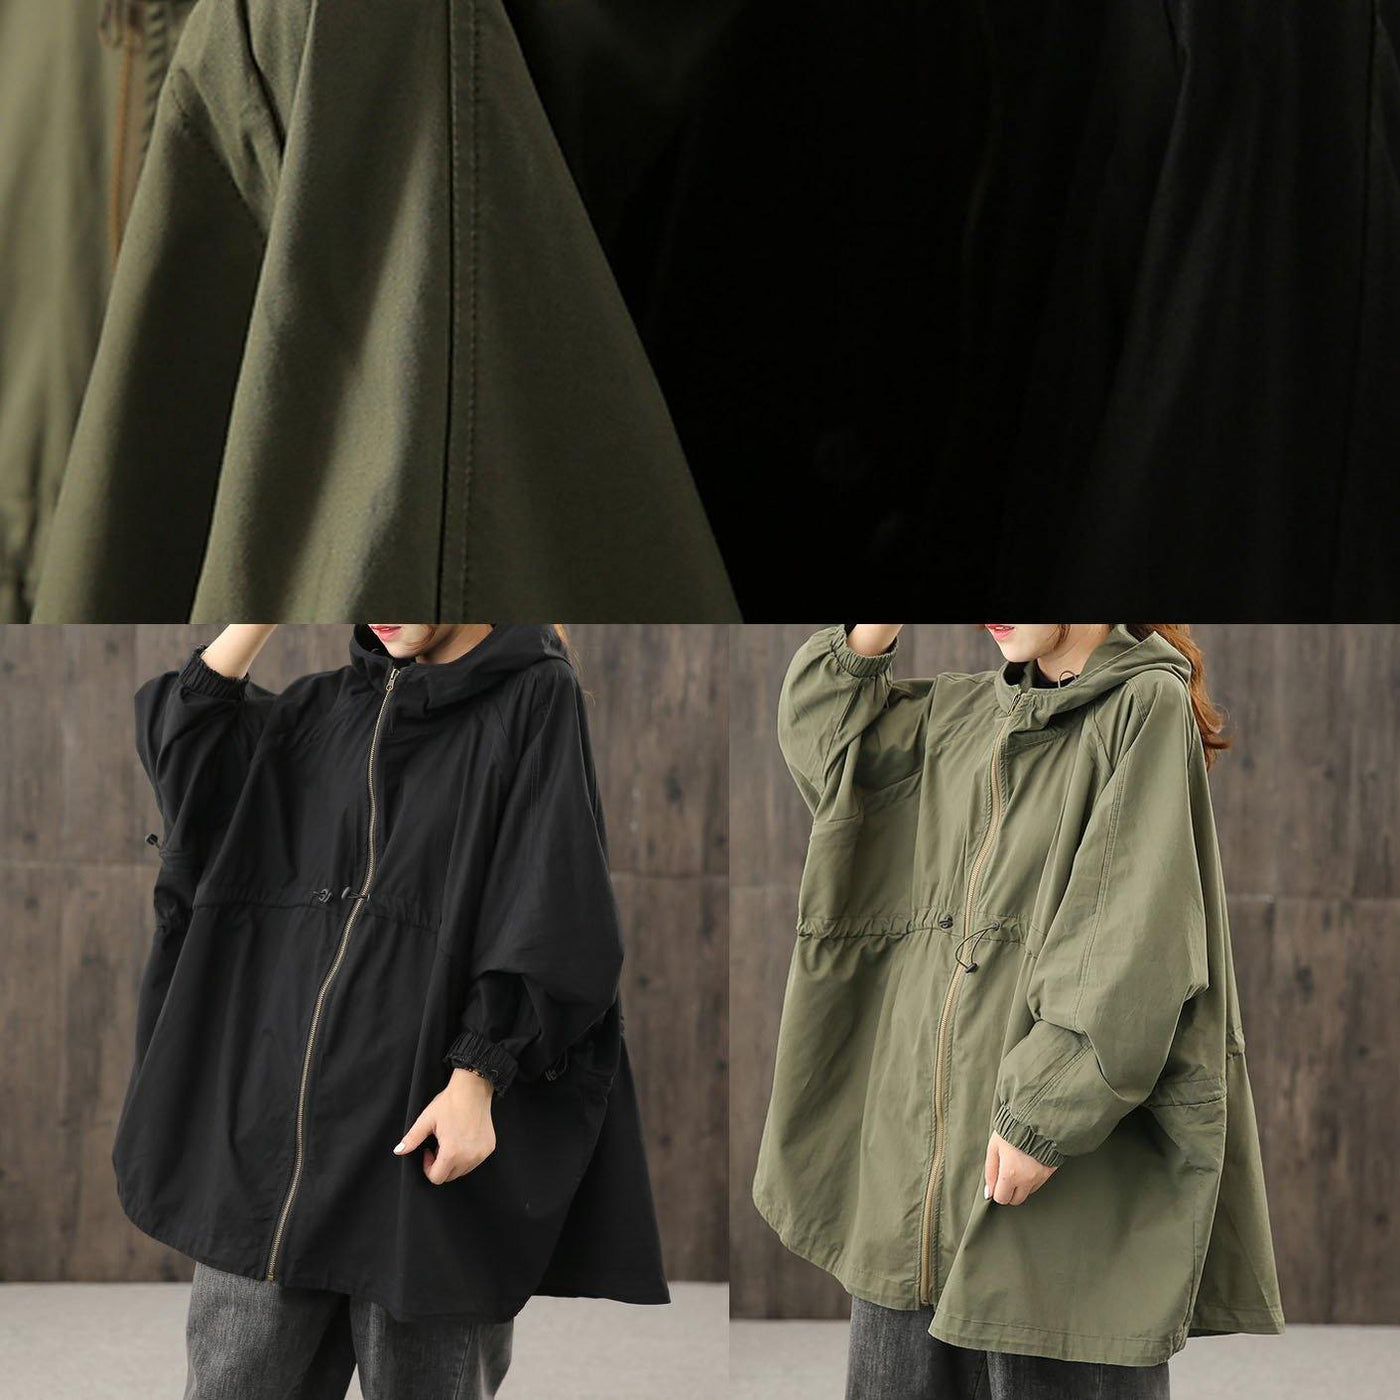 Modern hooded zippered clothes For Women Shape army green Coats Outwear